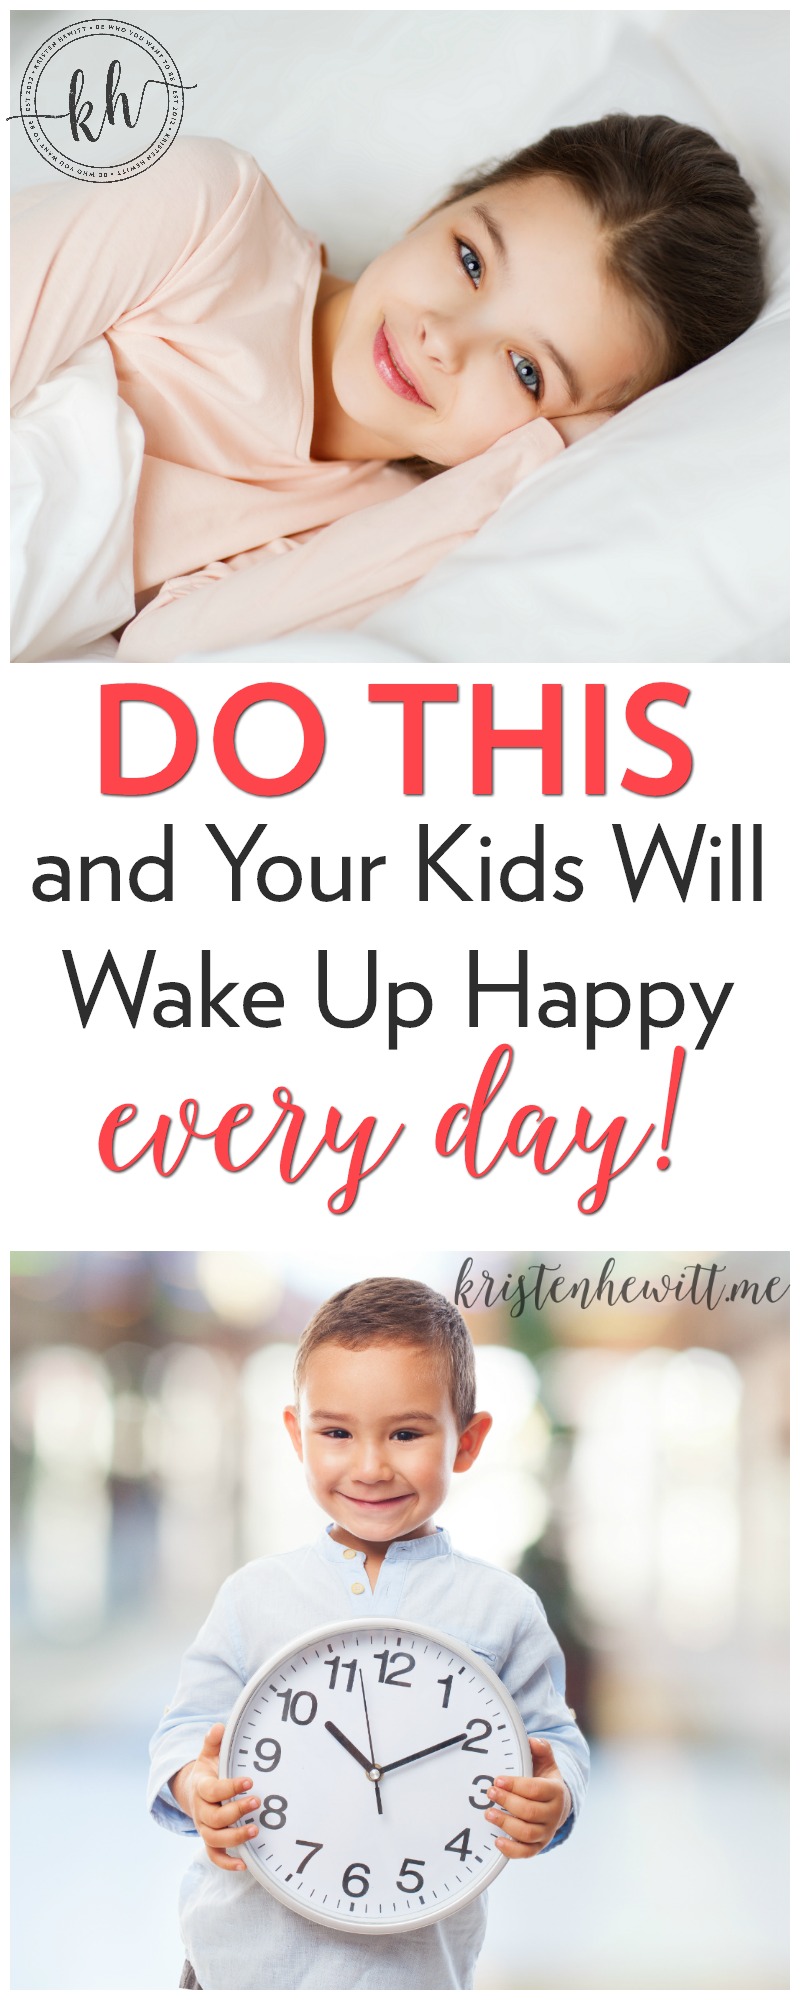 Do your kids wake up grumpy? Or mornings the worst part of your day? Try this and I guarantee your kids will wake up happy every day!